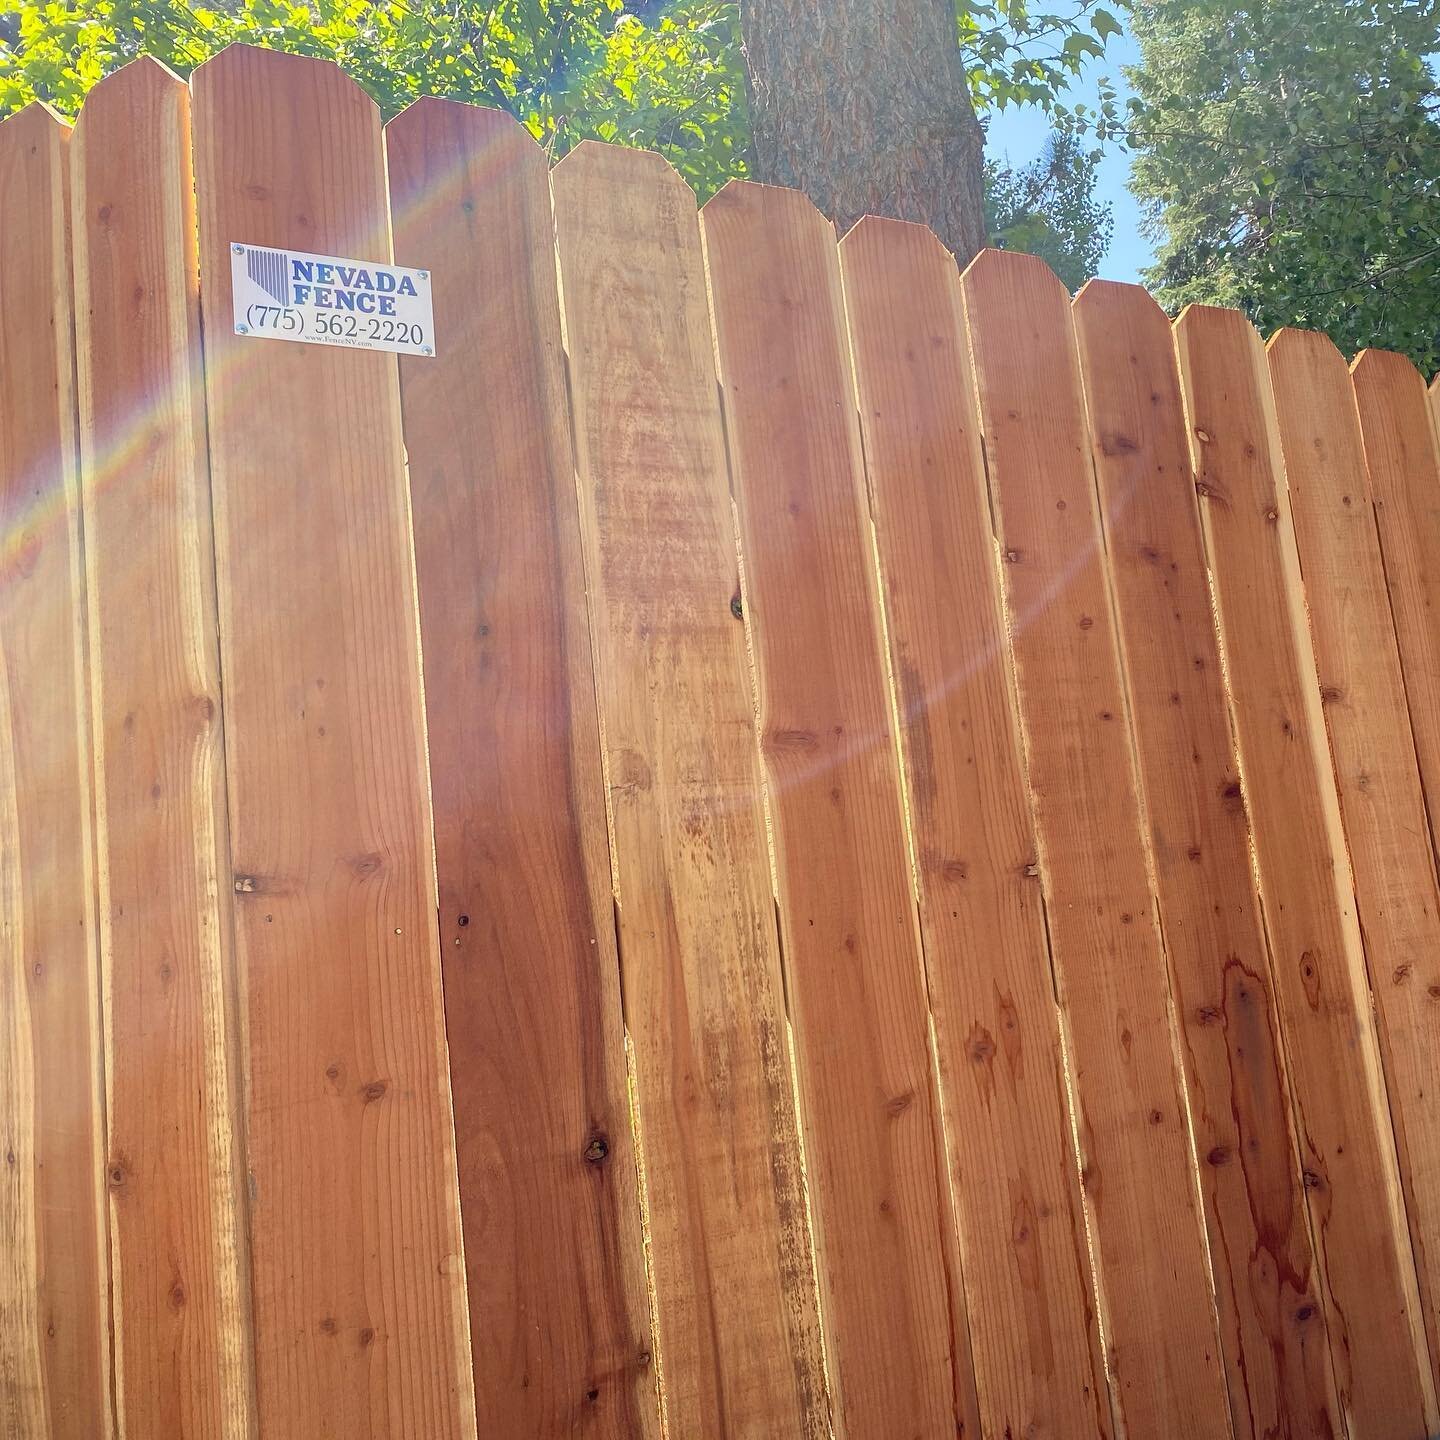 Where there&rsquo;s a will, there&rsquo;s a way! 1x8&rdquo; redwood picketed dog ear fence 🍂☀️ with three 2x4 rails. #BuiltToLast #NevadaFence